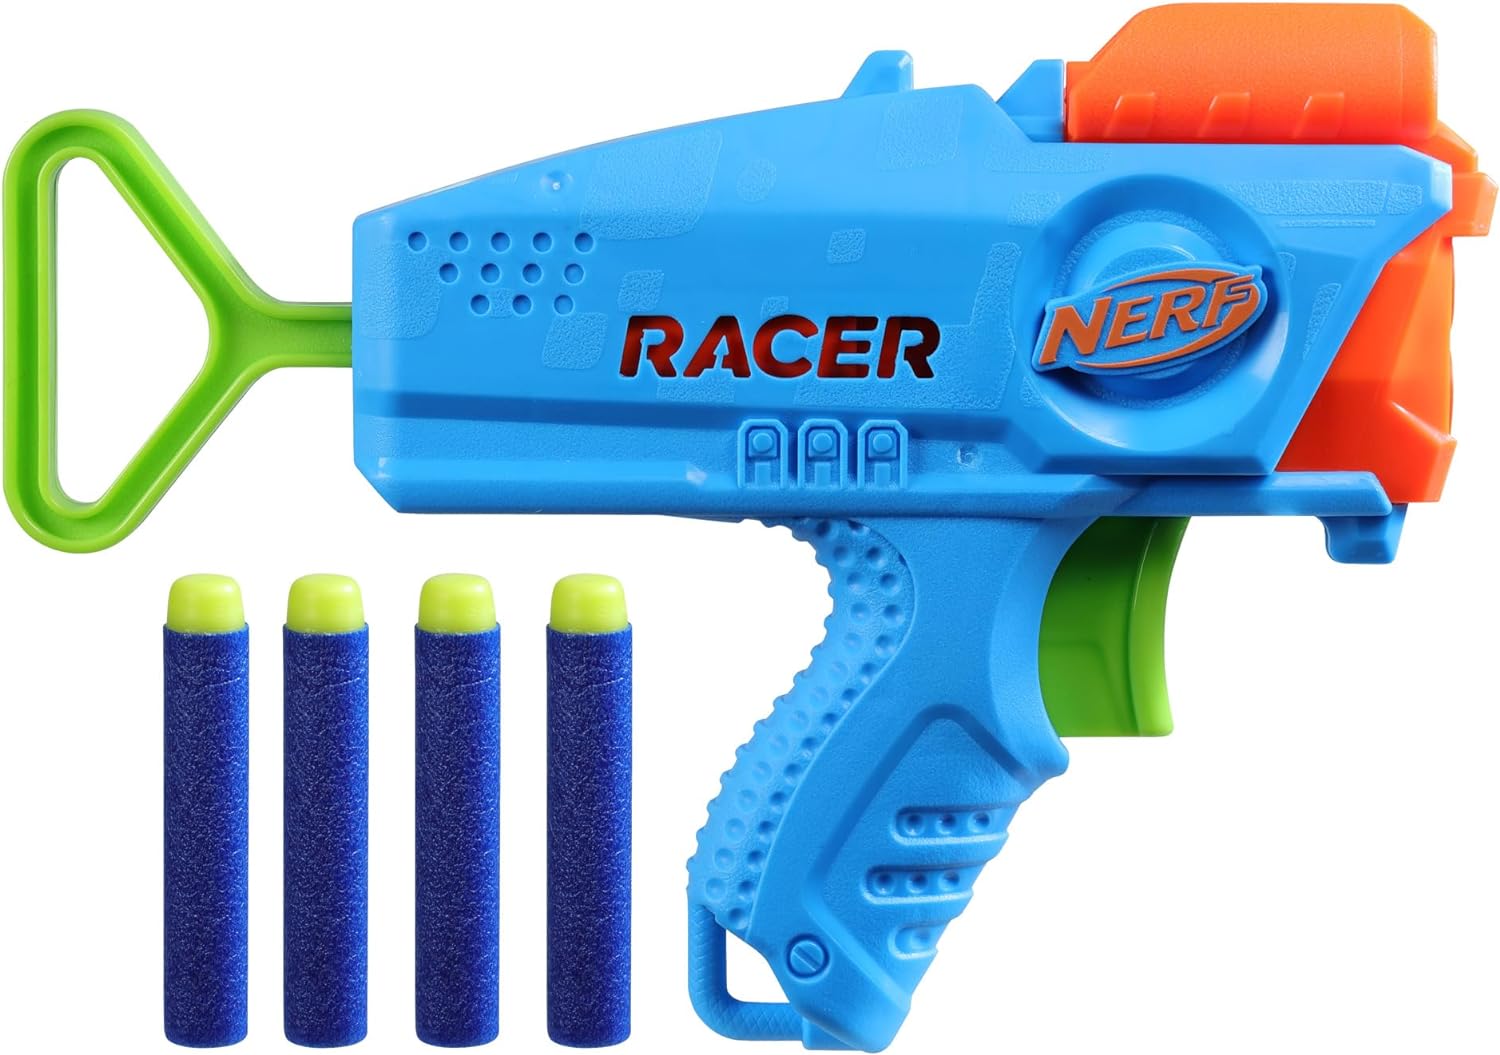 My 4.5 year old son has some friends who are older and use nerf guns but he struggled with cocking it. This gun is great. It is very easy for him manage. The bullets are just placed in the gun and then one easy pull back. He can do it all on his own which is great. The only downside is it only holds 4 bullets so a lot of reloading but it works great for his age.